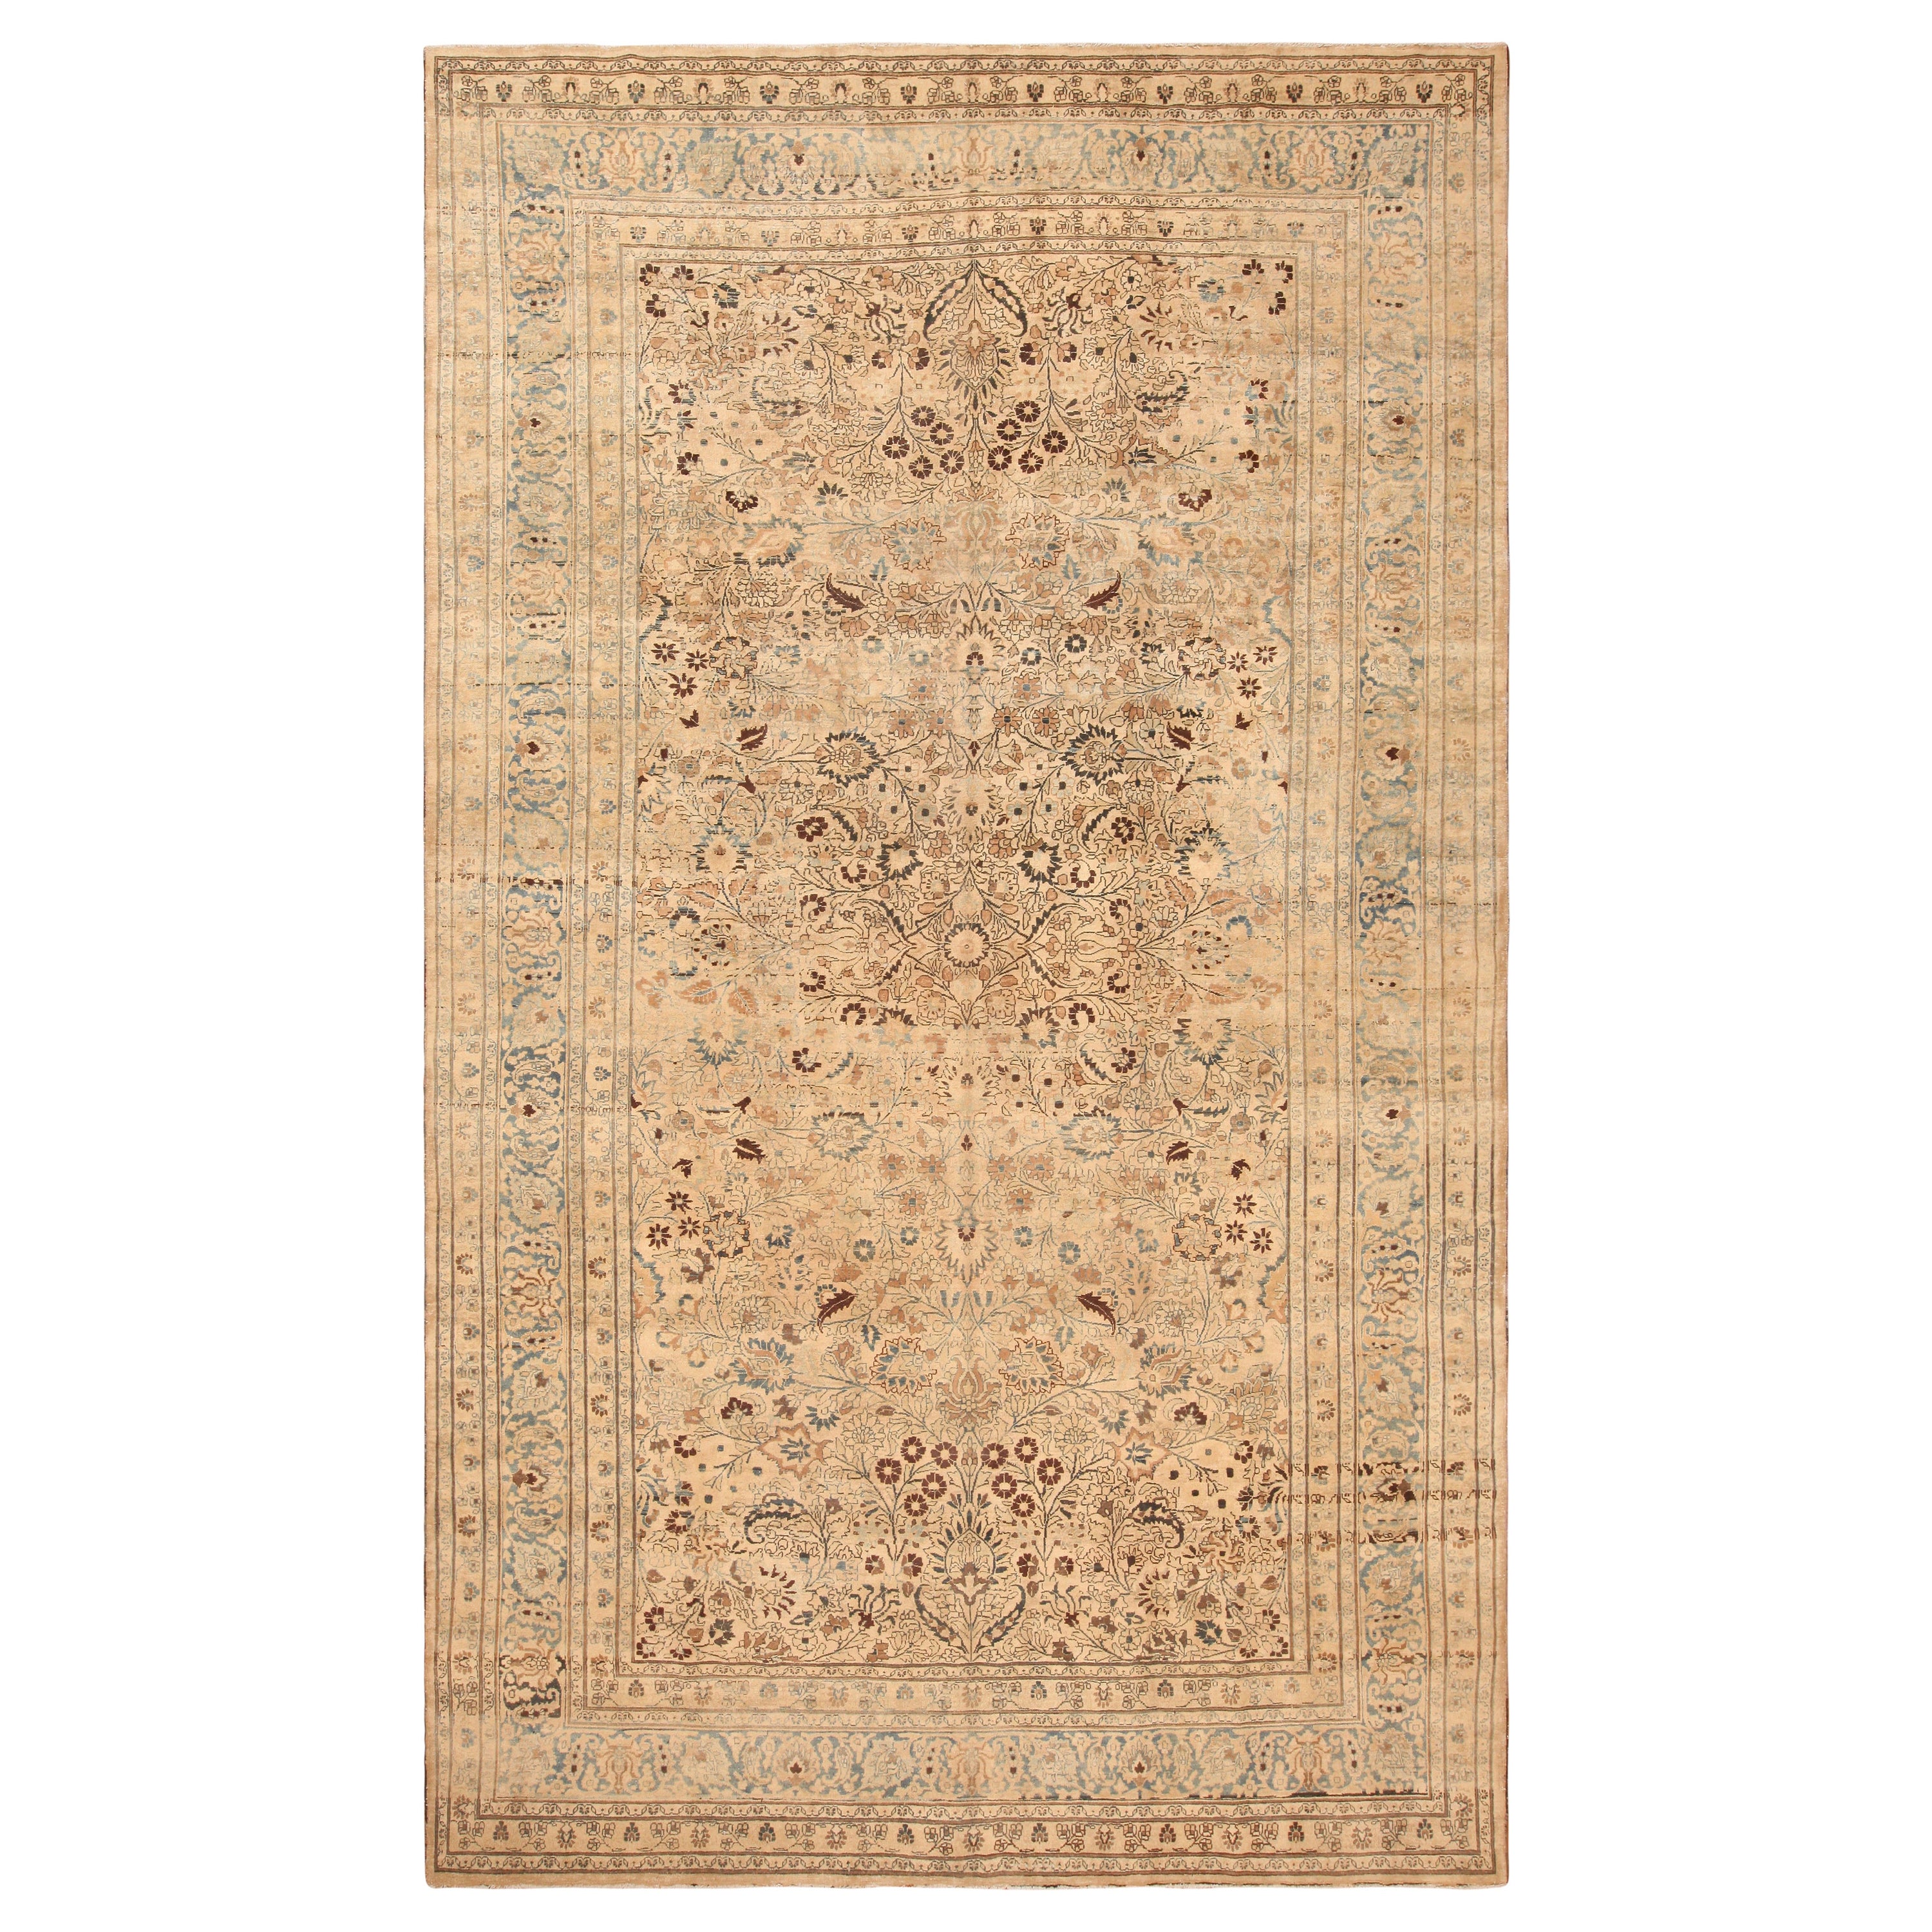 Nazmiyal Collection Antique Persian Khorassan Rug. Size: 9 ft 10 in x 16 ft 7 in